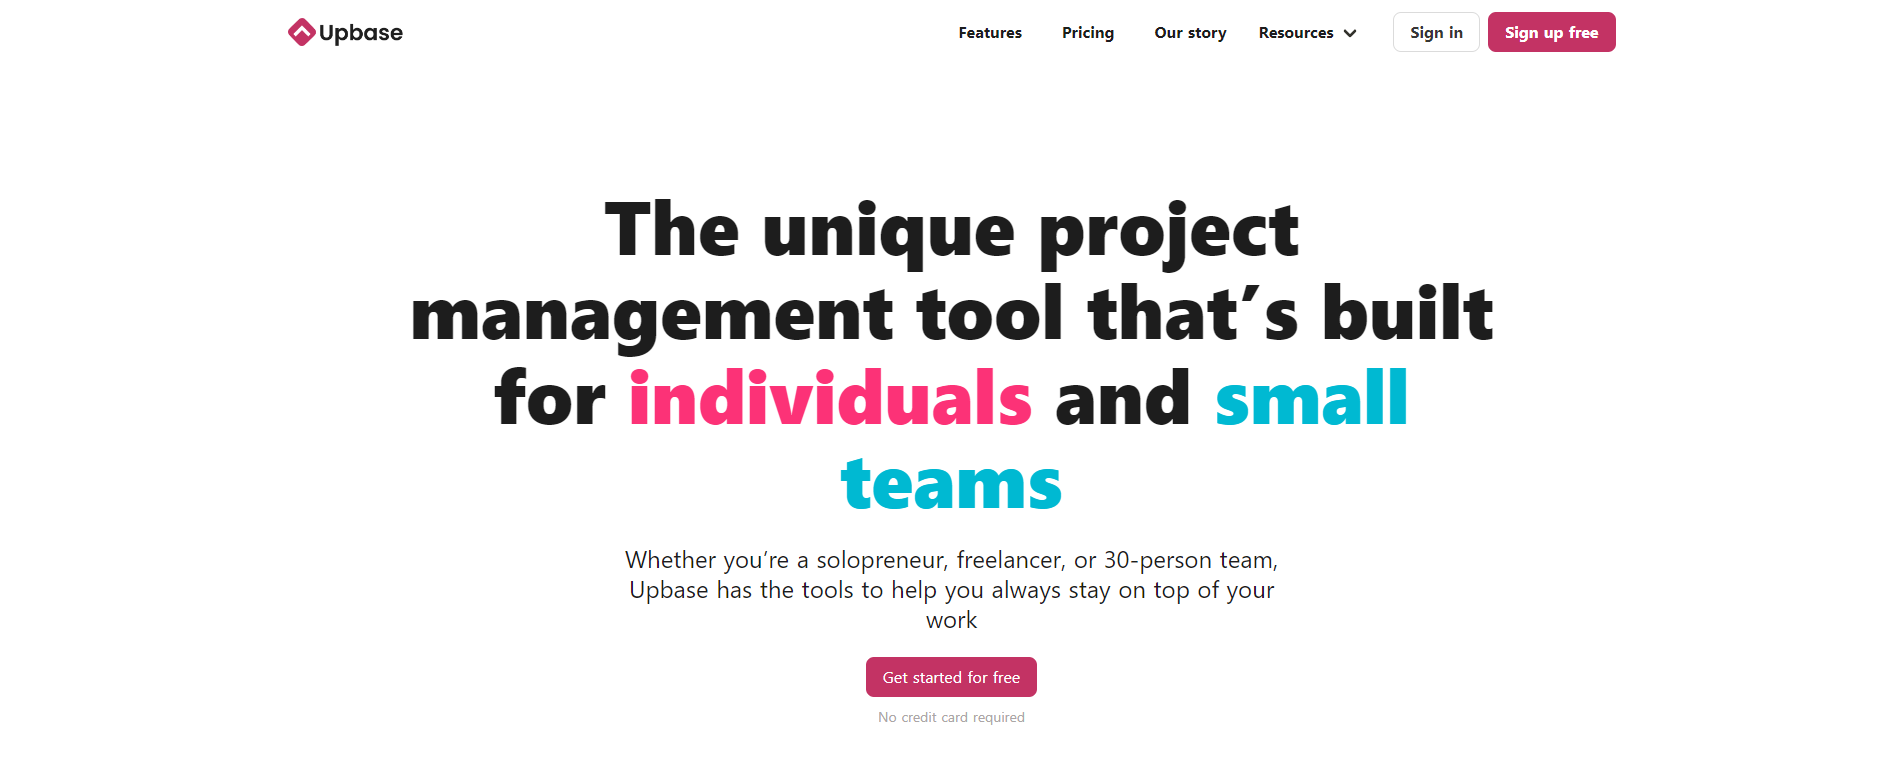 13 Best Project Management Software For Small Teams. #1 Upbase